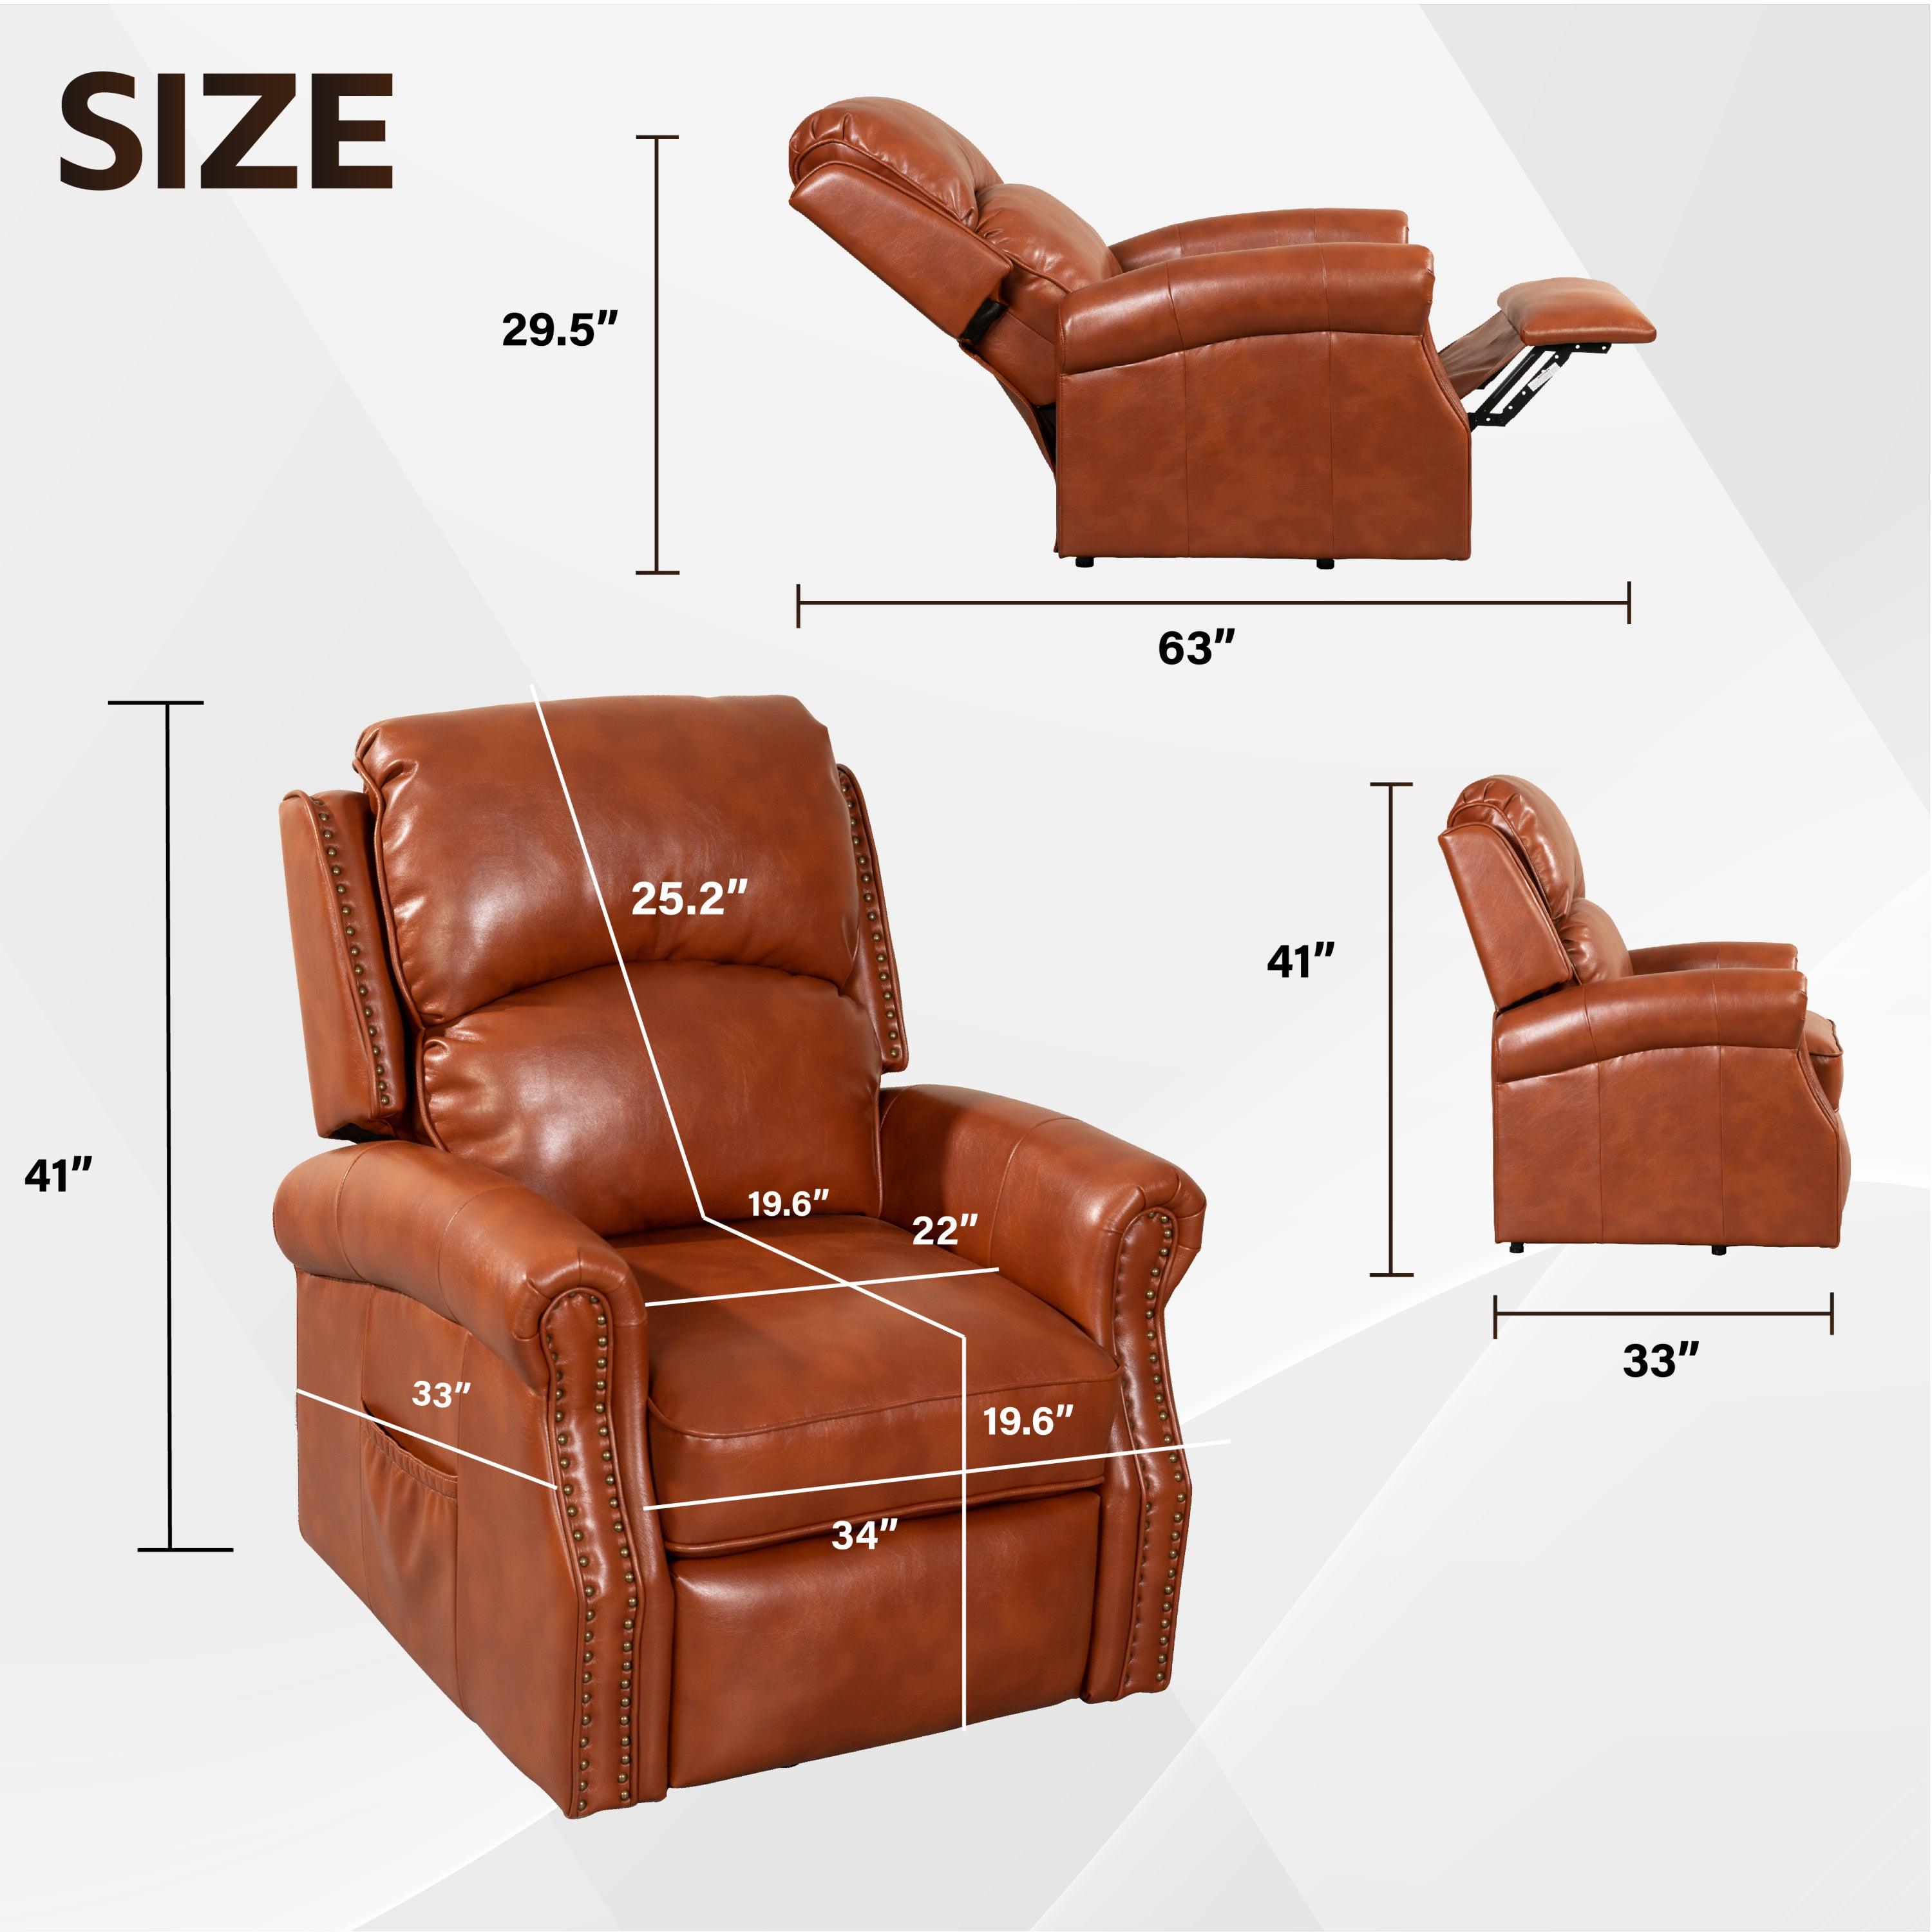 Dimensions for Caramel Electric Power Lift Recliner